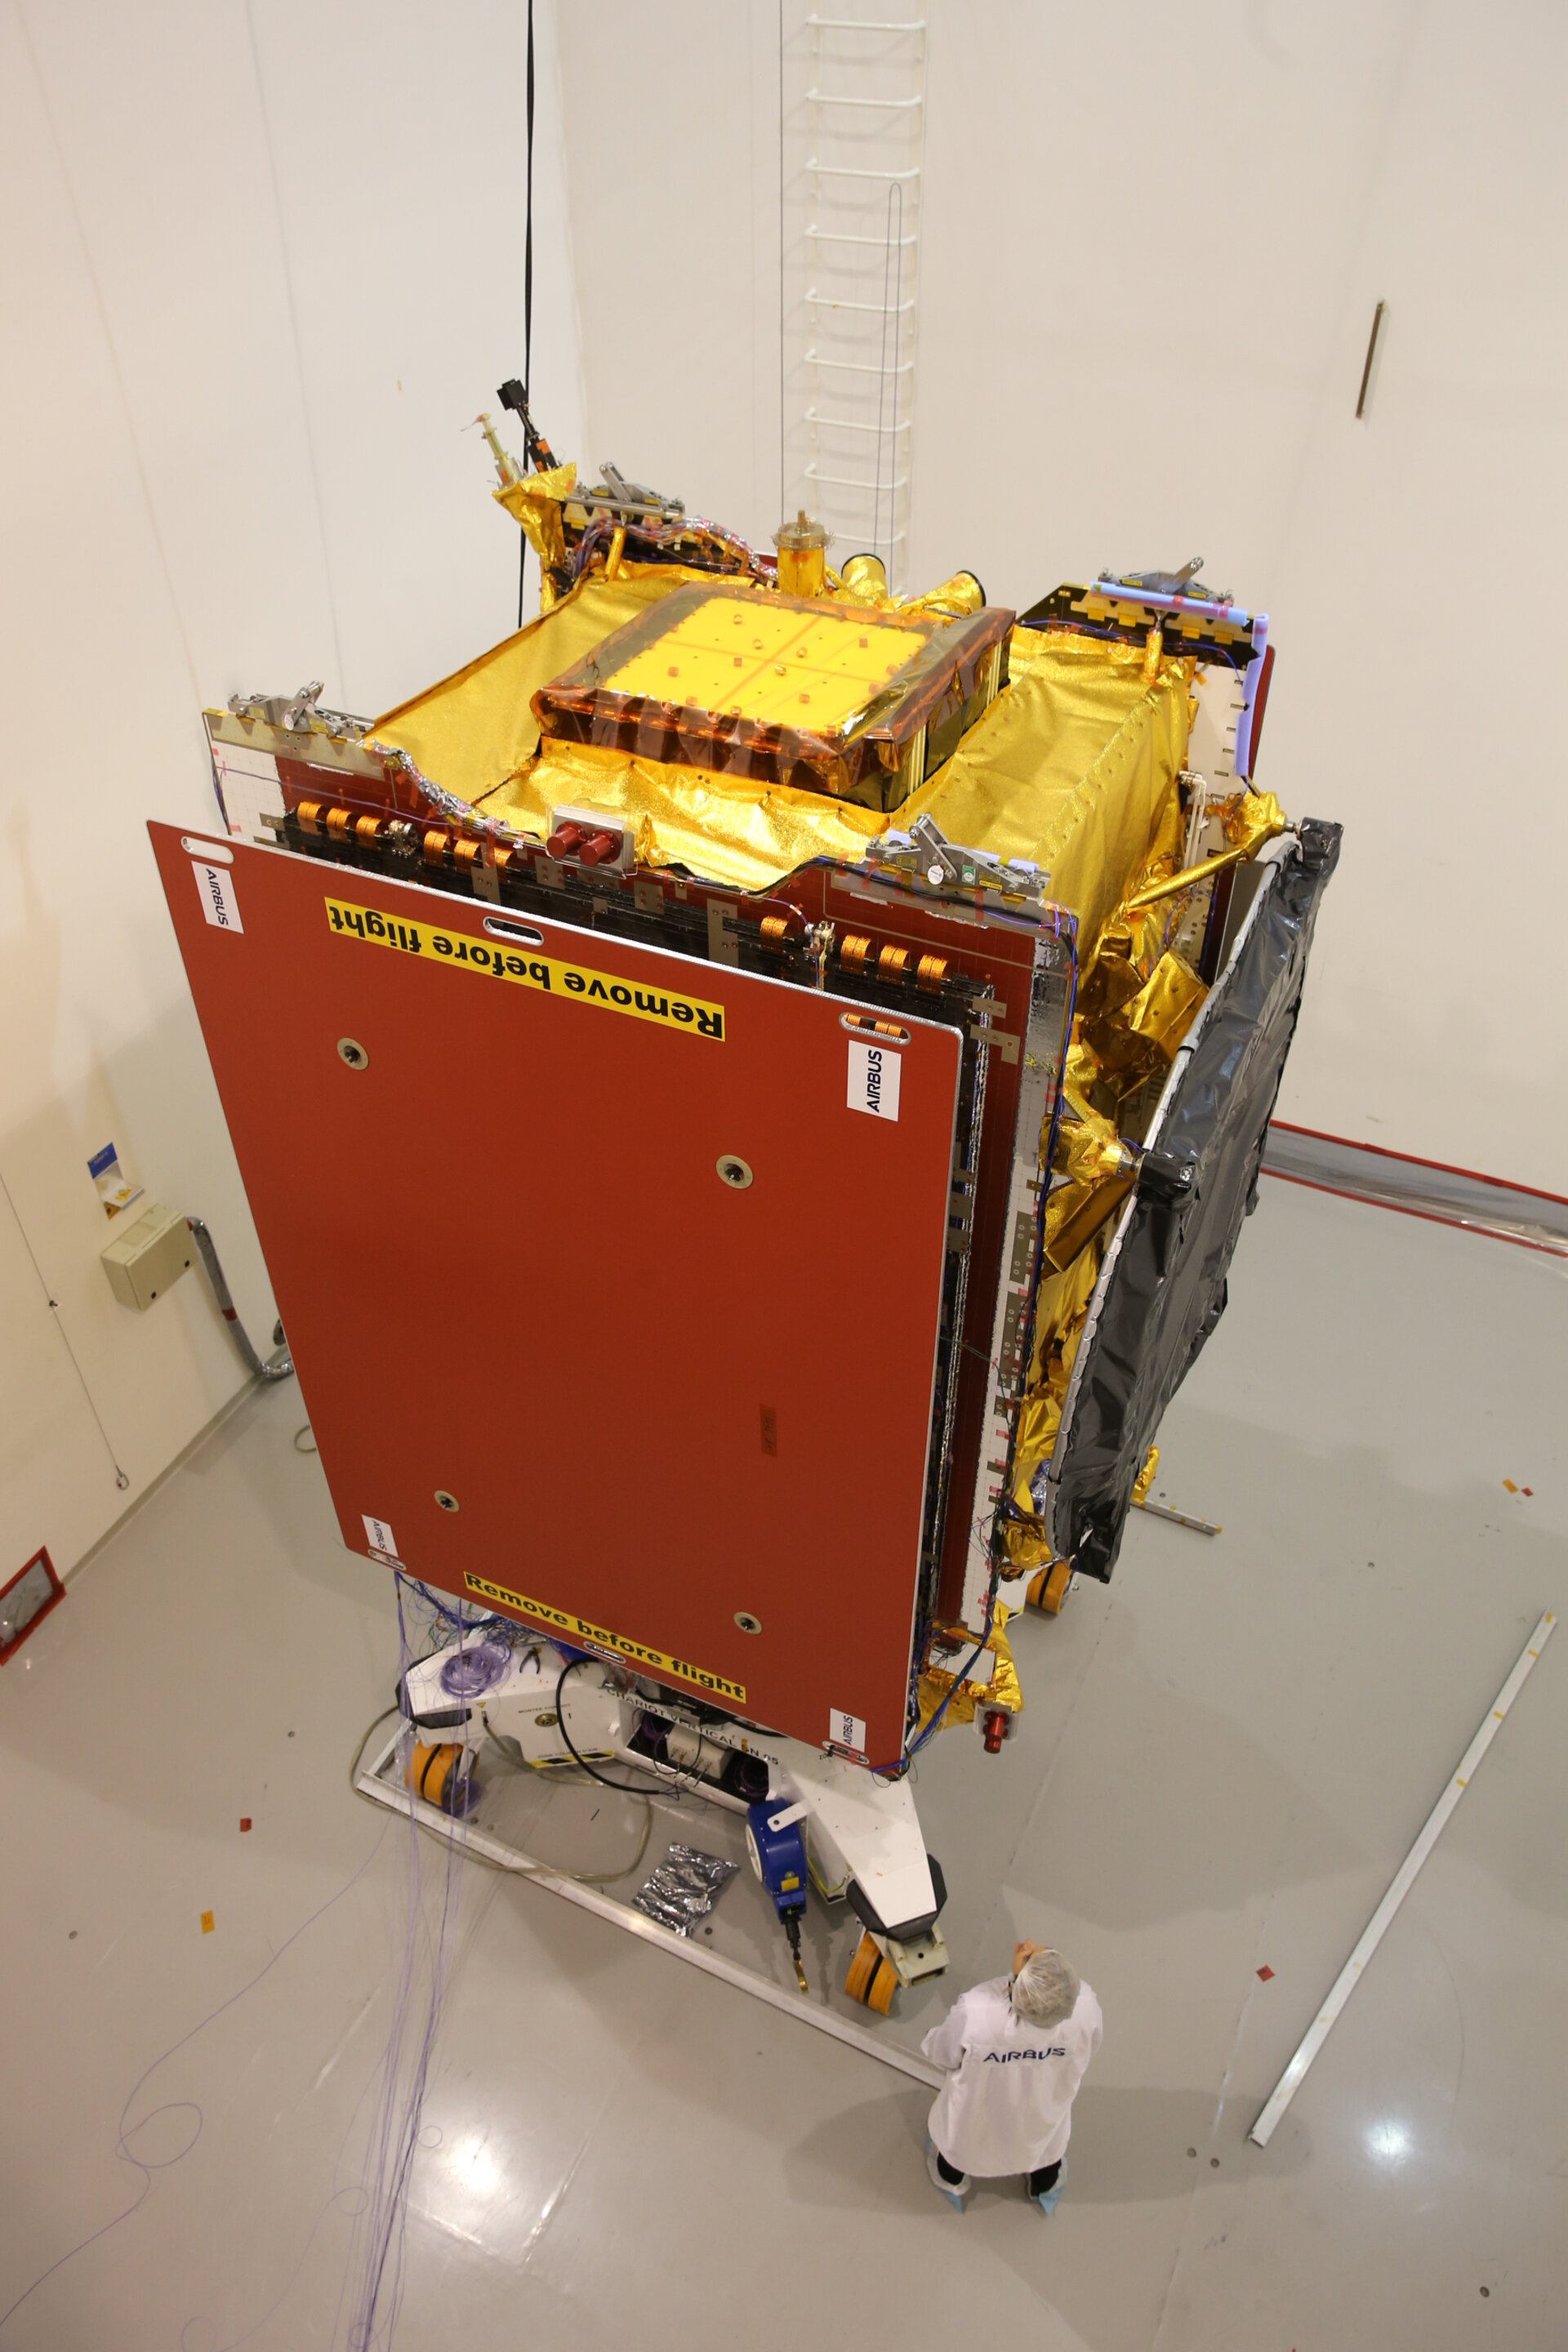 Quantum satellite at the mechanical test facility